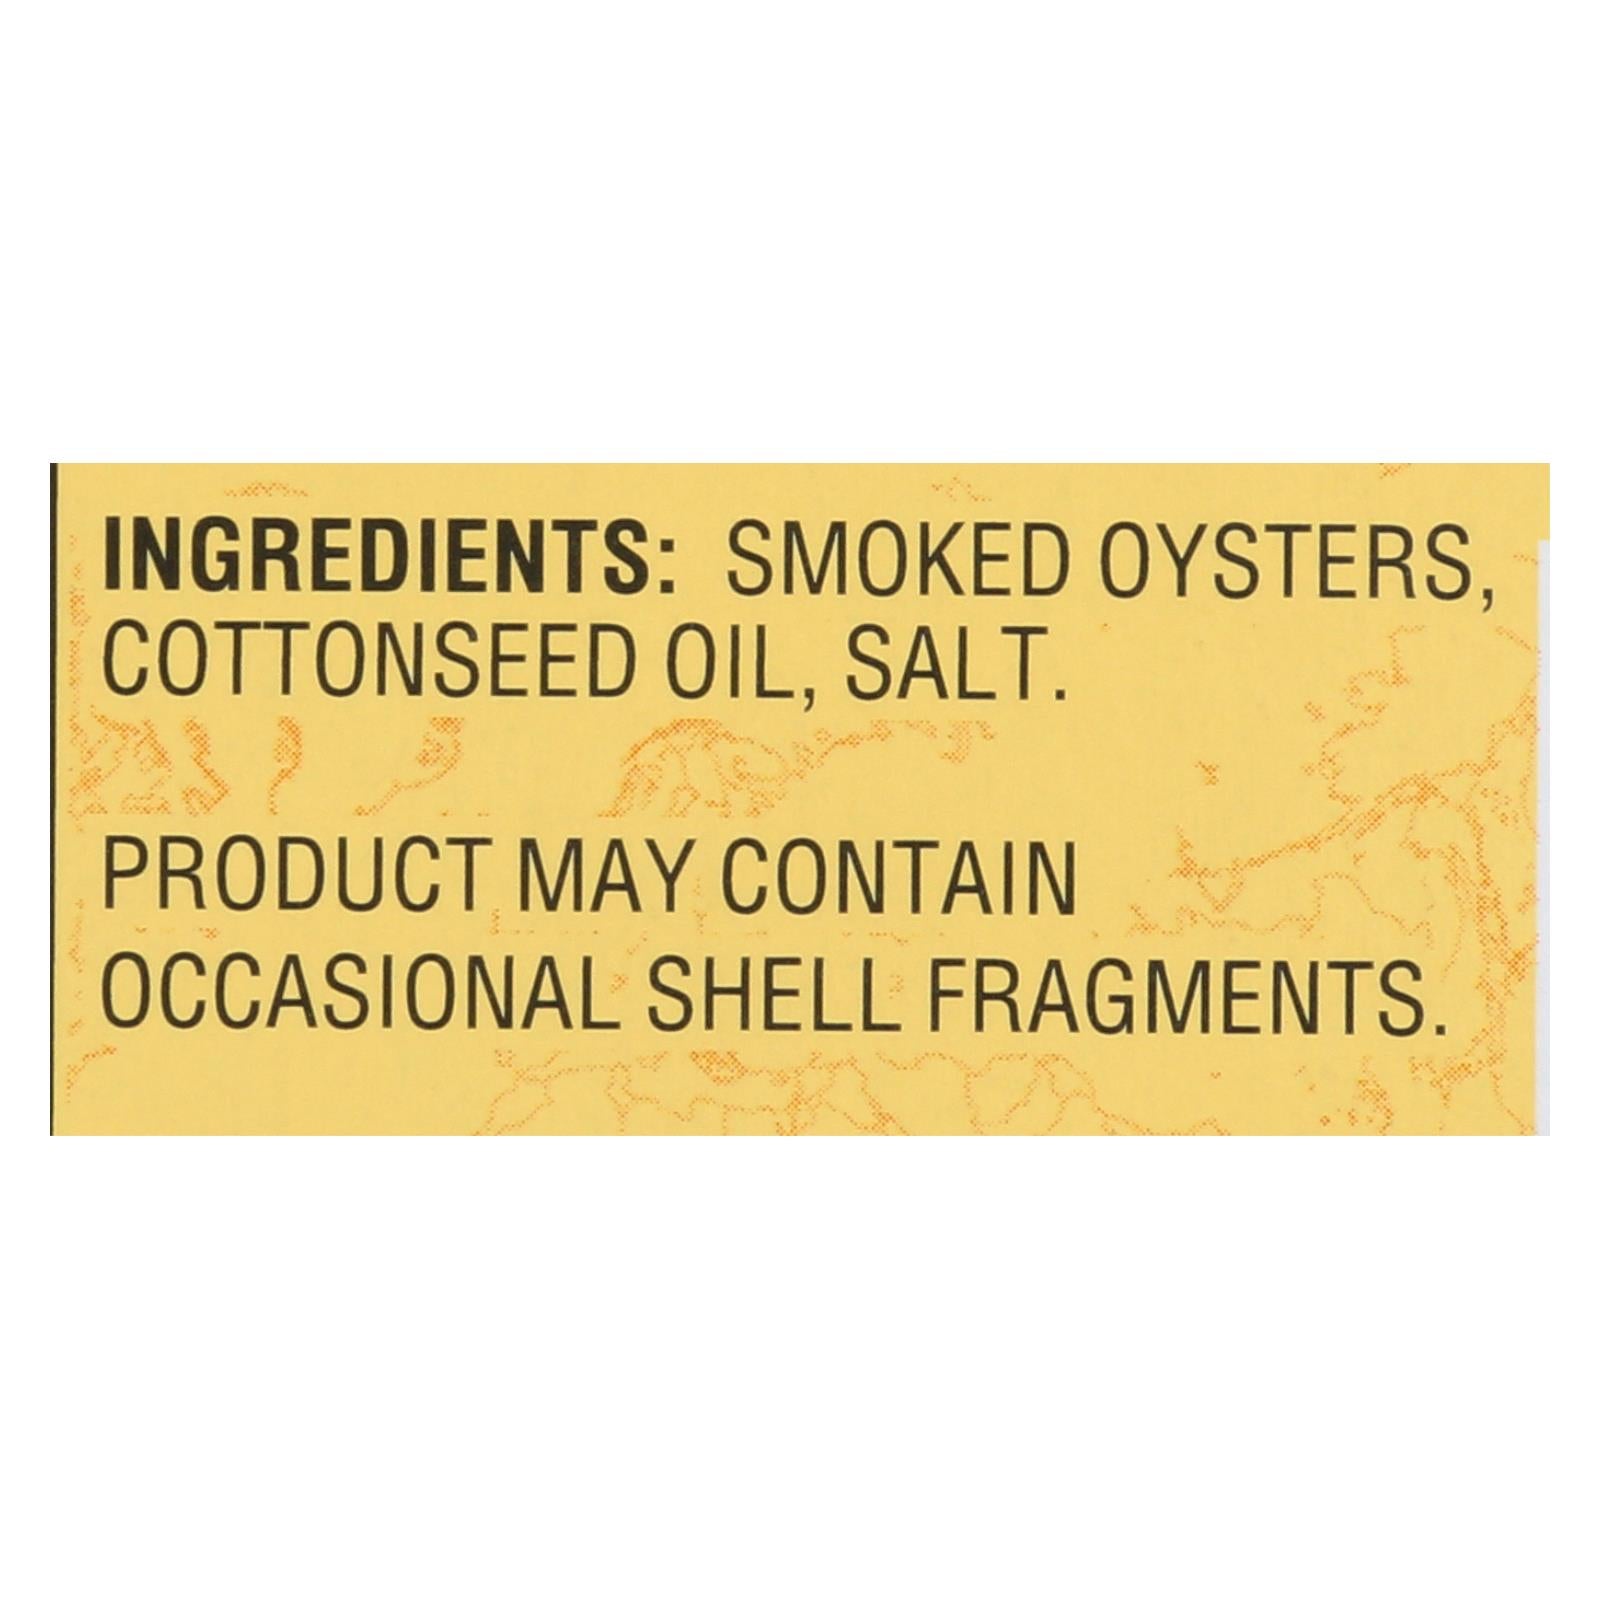 Reese Oysters - Smoked - Medium - 3.7 Oz - Case Of 10